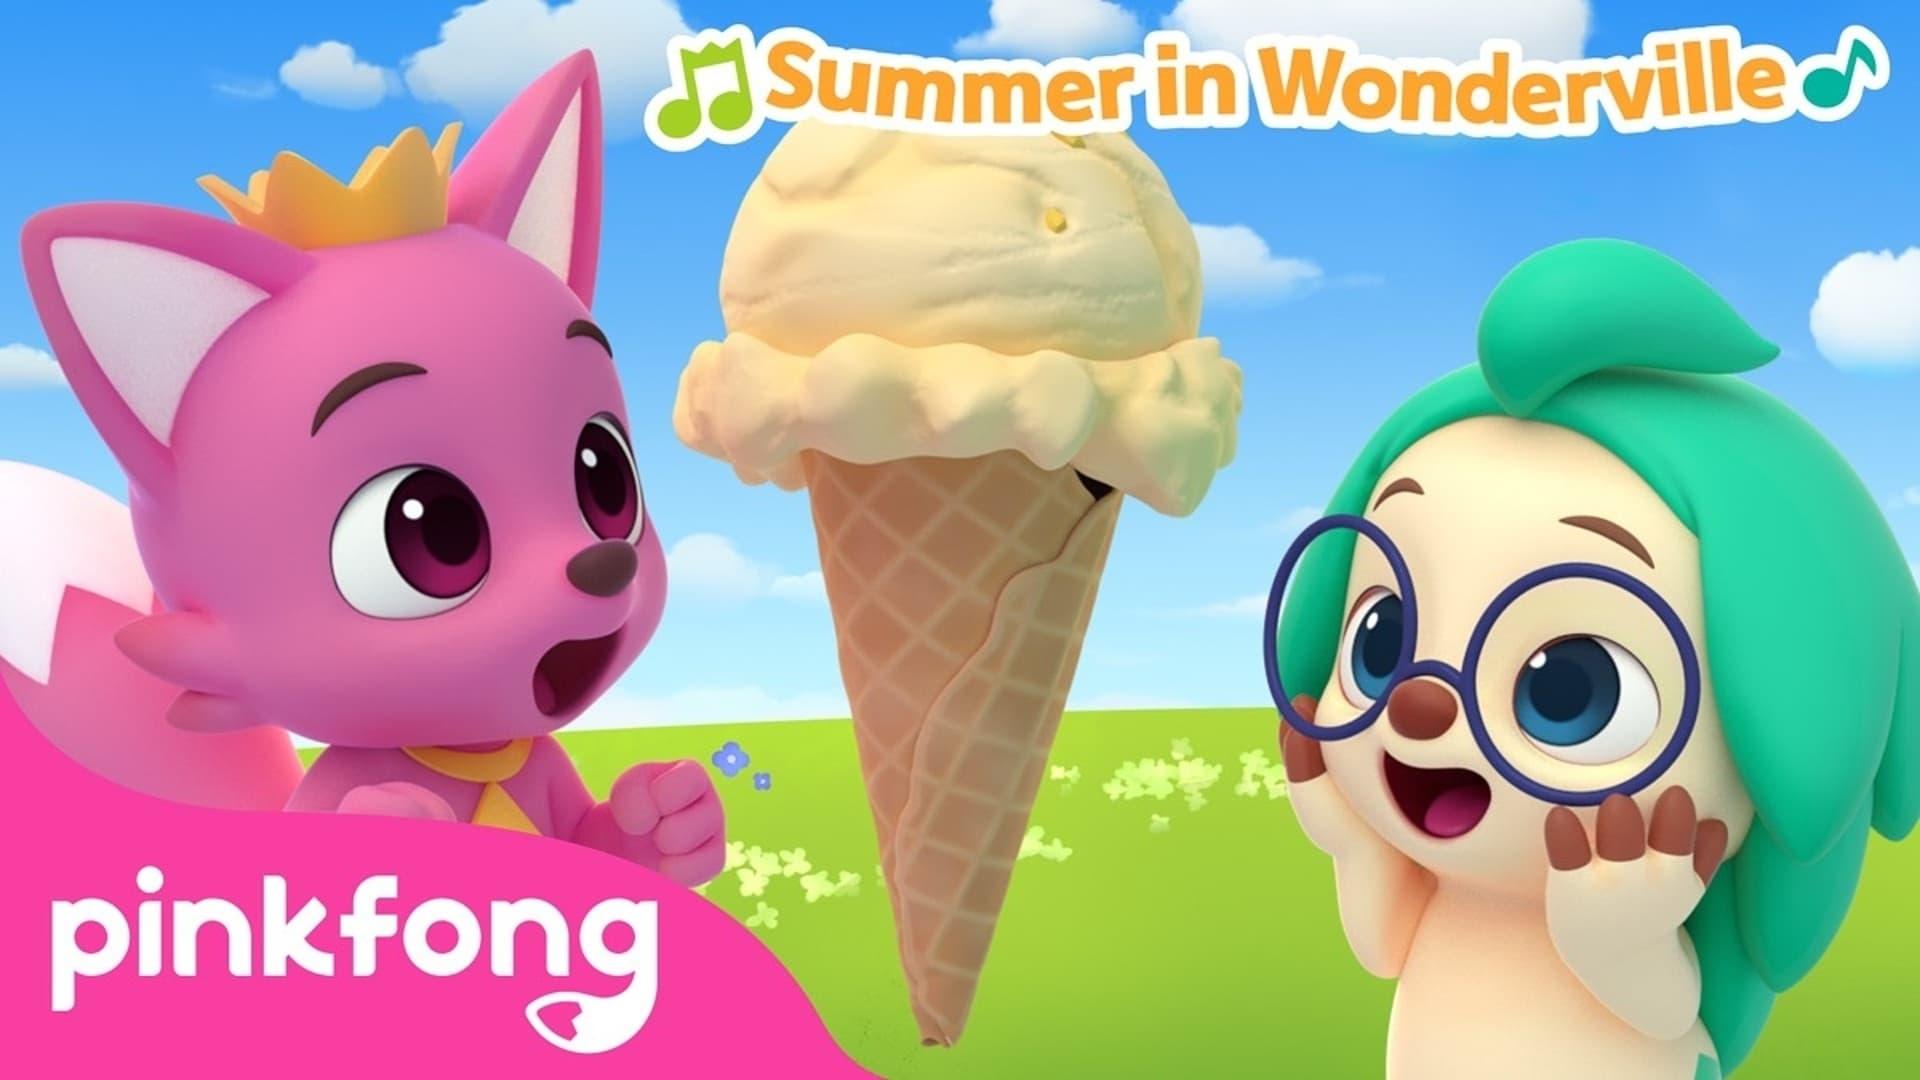 Pinkfong! Summer in Wonderville backdrop